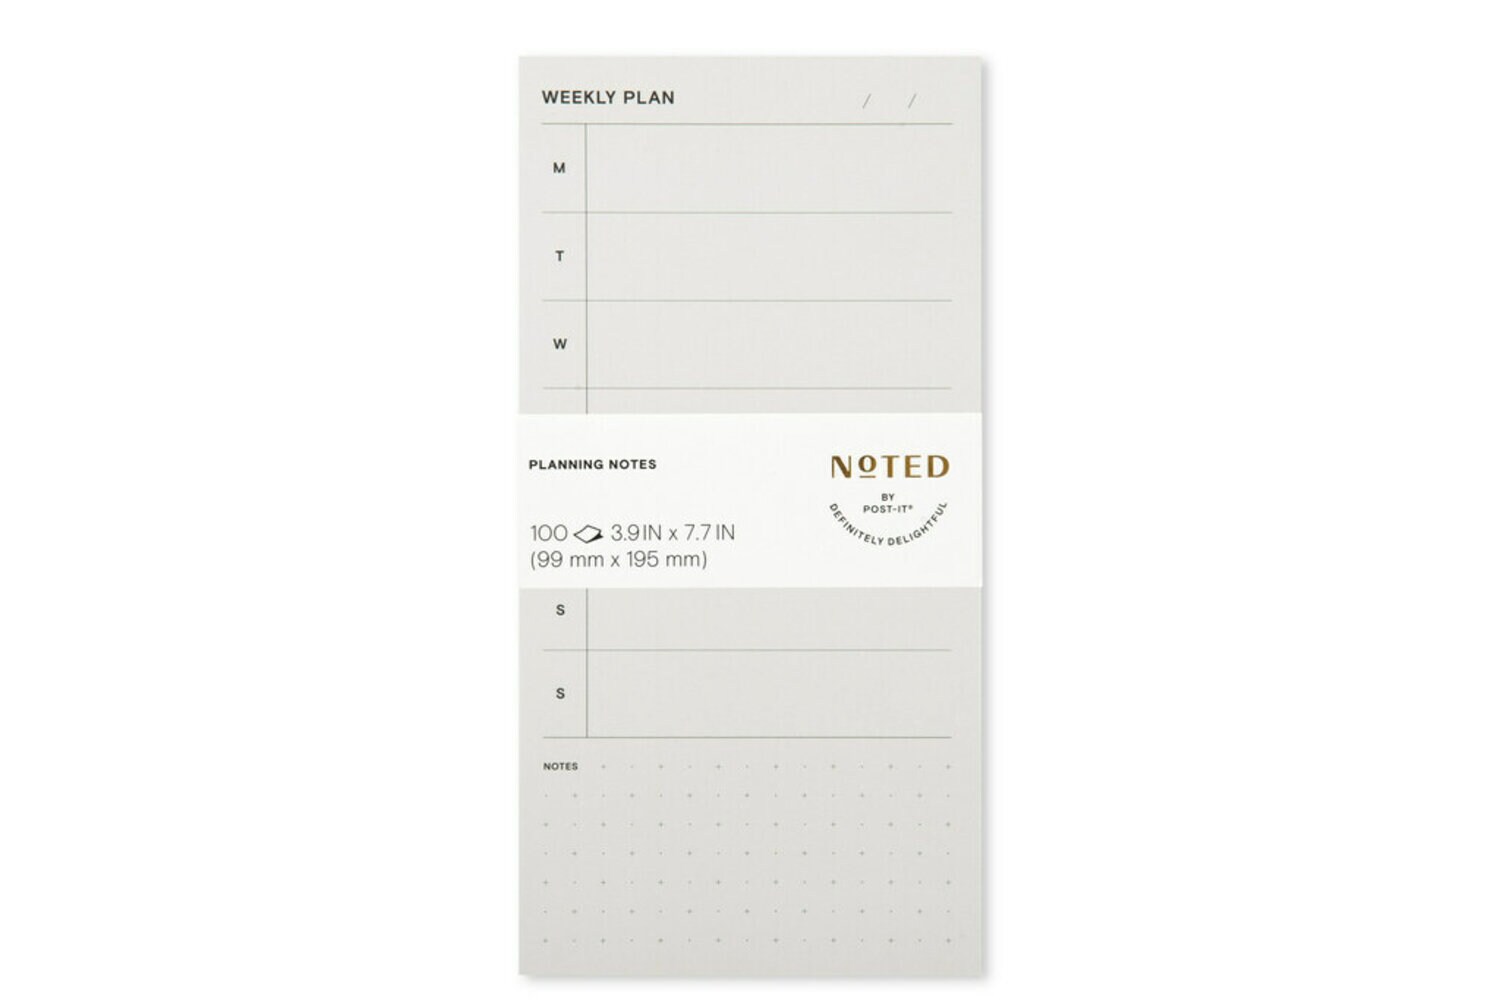 7100256645 - Post-it Printed Notes NTD-48-NT, 3.9 in x 7.7 in (99 mm x 195 mm)